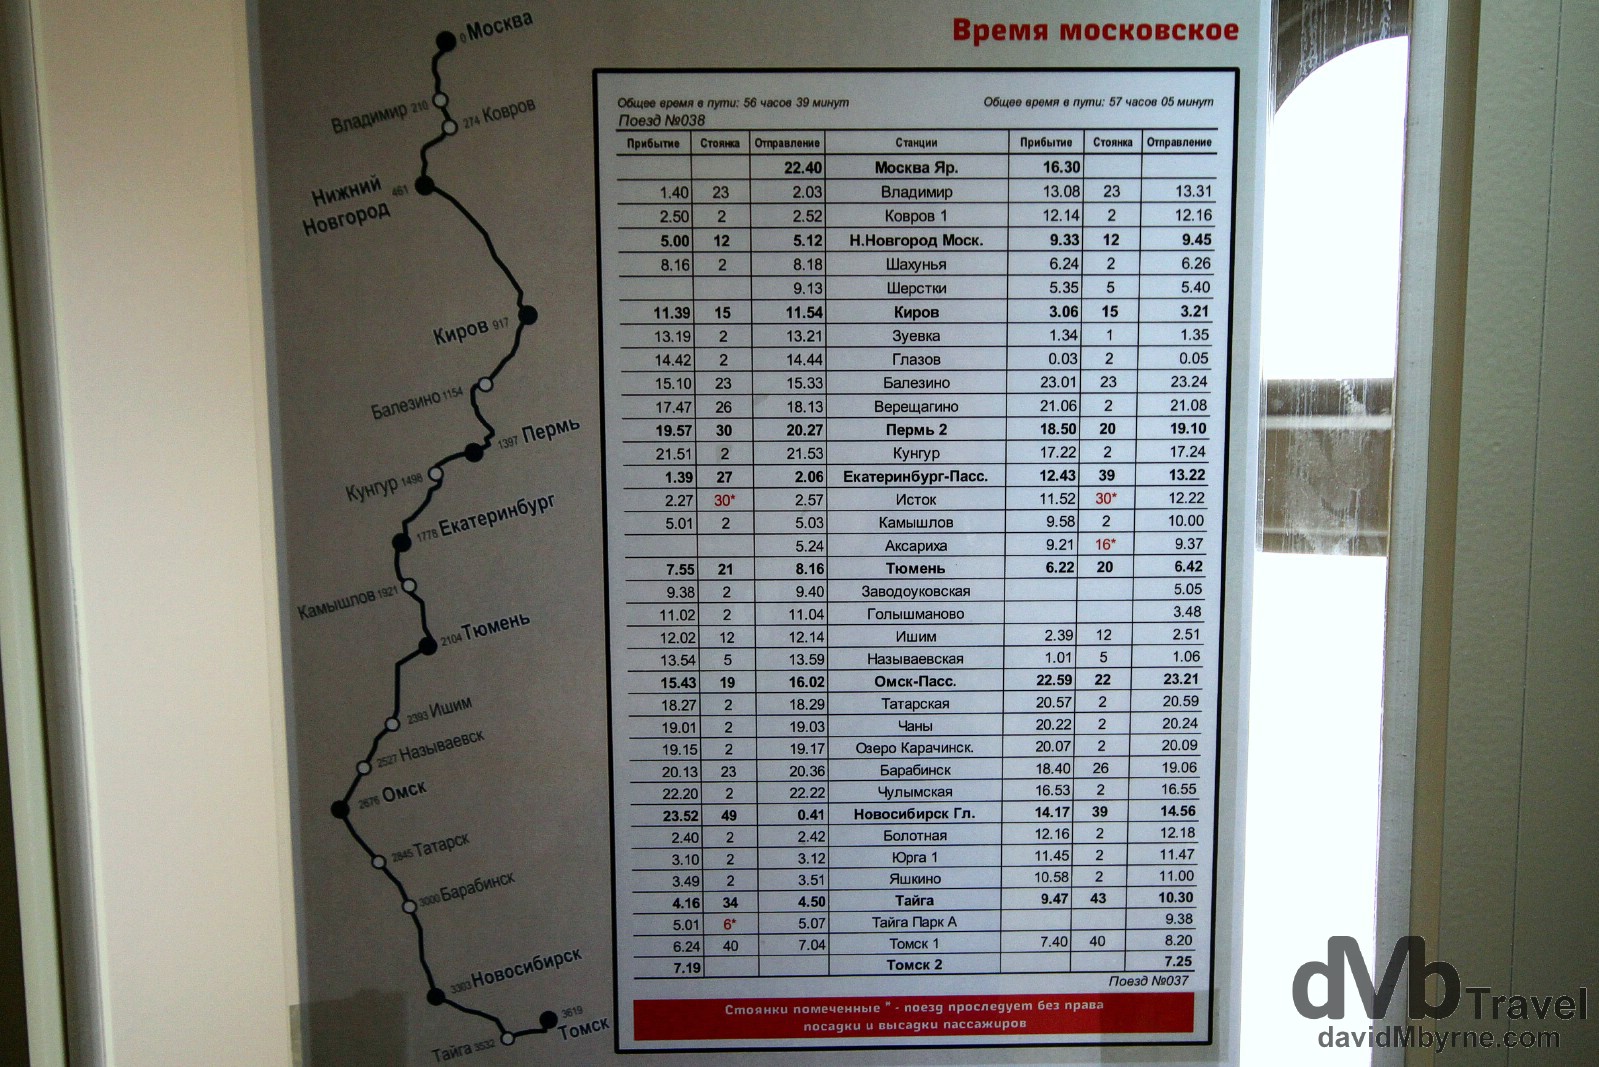 The Trans-Siberian bible - the end of carriage timetable for Train 38's 3,619 kilometre trip from Tomsk in Siberian Russia to Moscow.